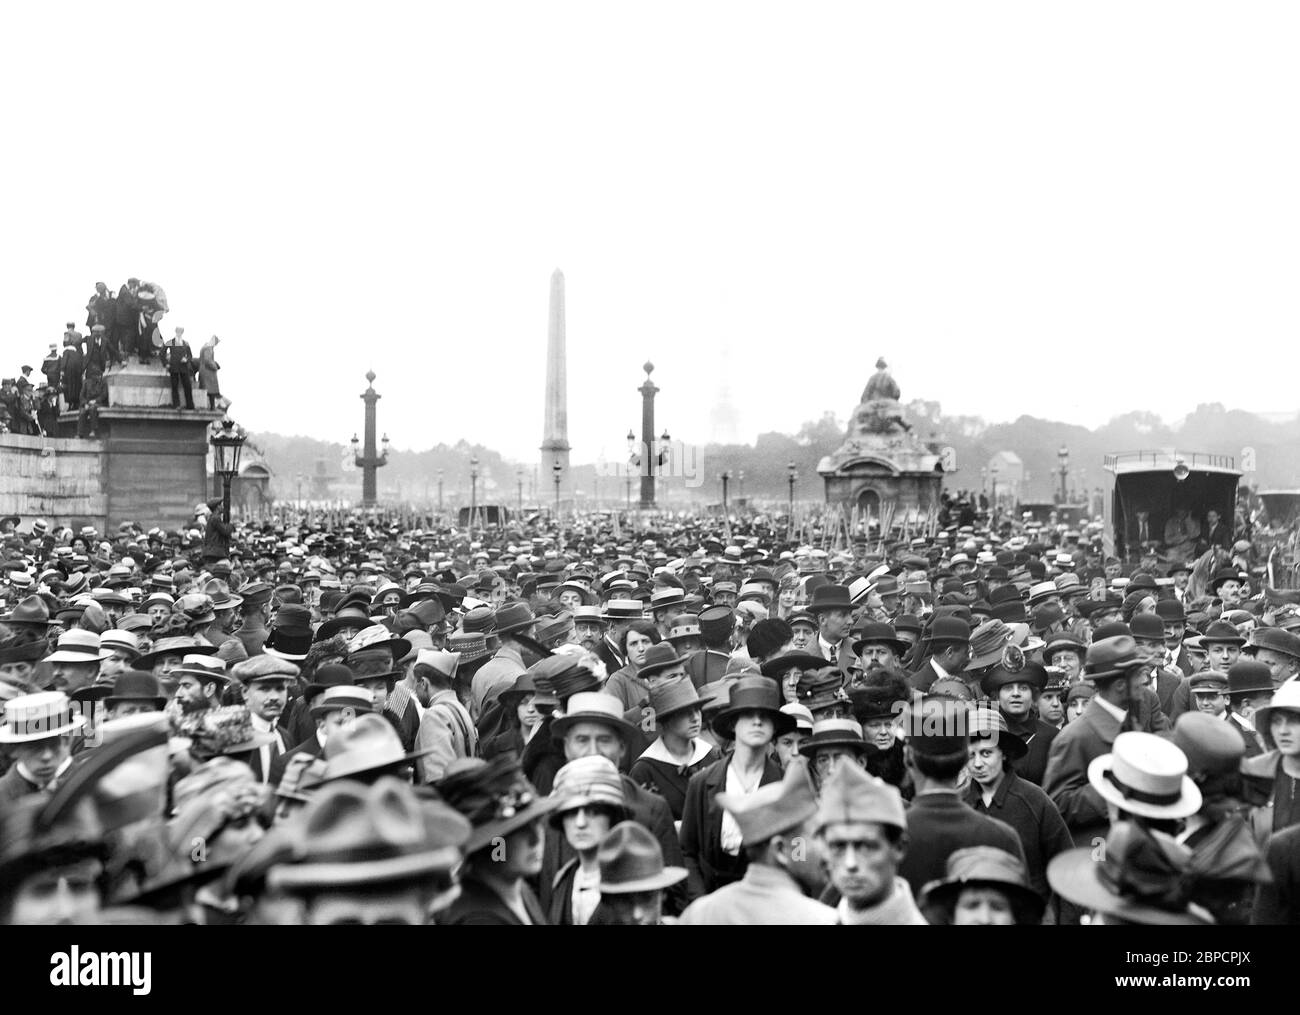 Crowd gathered to see American Troops march in Parade to Celebrate American Independence Day, Place de la Concorde, Paris, France, Lewis Wickes Hine, American National Red Cross Photograph Collection, July 4th, 1918 Stock Photo